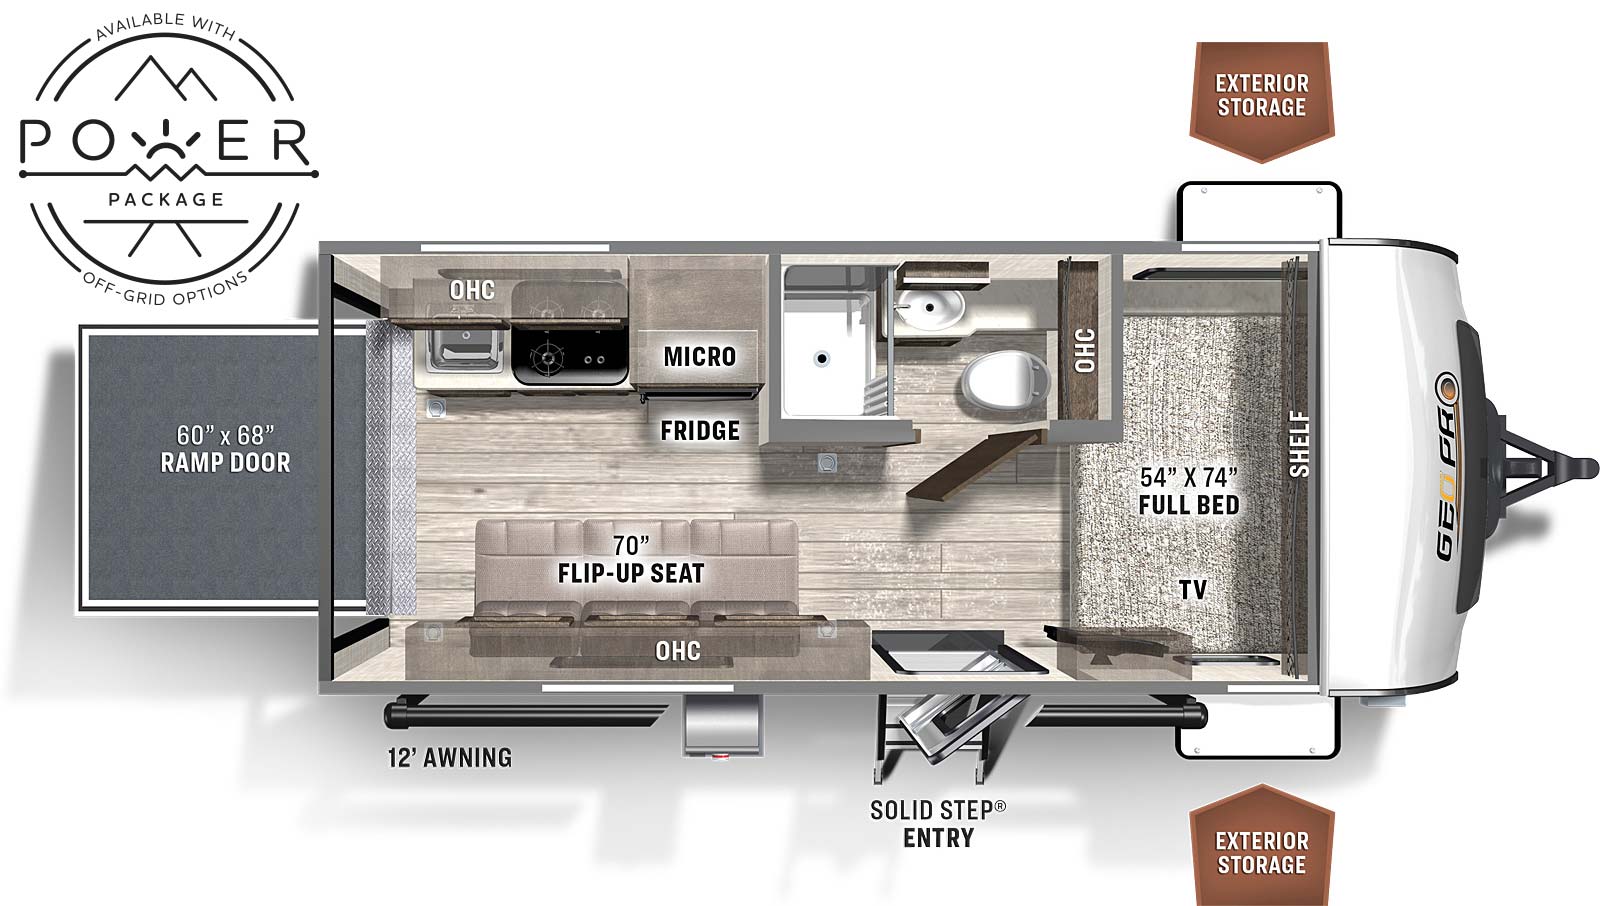 The G19FBTH has no slide outs and one solid step entry door on the door side and a 60 by 68 inch rear ramp door. Exterior features include exterior storage and a 12 foot awning. Interior layout from front to back: 54 by 74 inch side facing full bed with overhead shelf and TV; off-door side aisle full bathroom; door side rear 70 inch flip-up seat with overhead cabinet; off-door side microwave, refrigerator, stove, sink and overhead cabinet. Available with Power Package Off-Grid Options